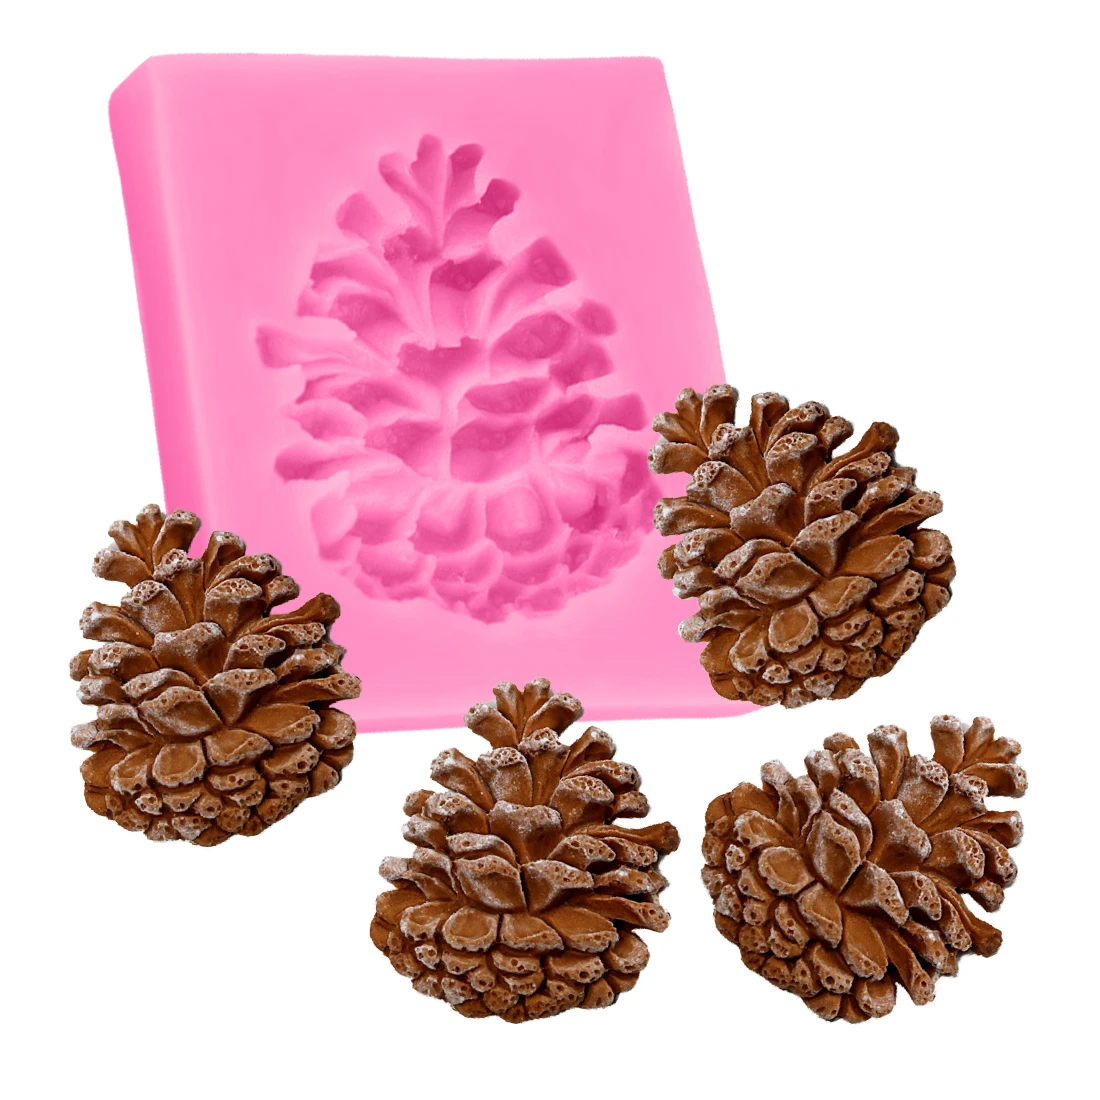 

Kitchen DIY Tool 1PC Pine Cones Shape Silicone Chocolate Mold Cake Decorating Tool Soap Mold Cake Stencil Baking Pan